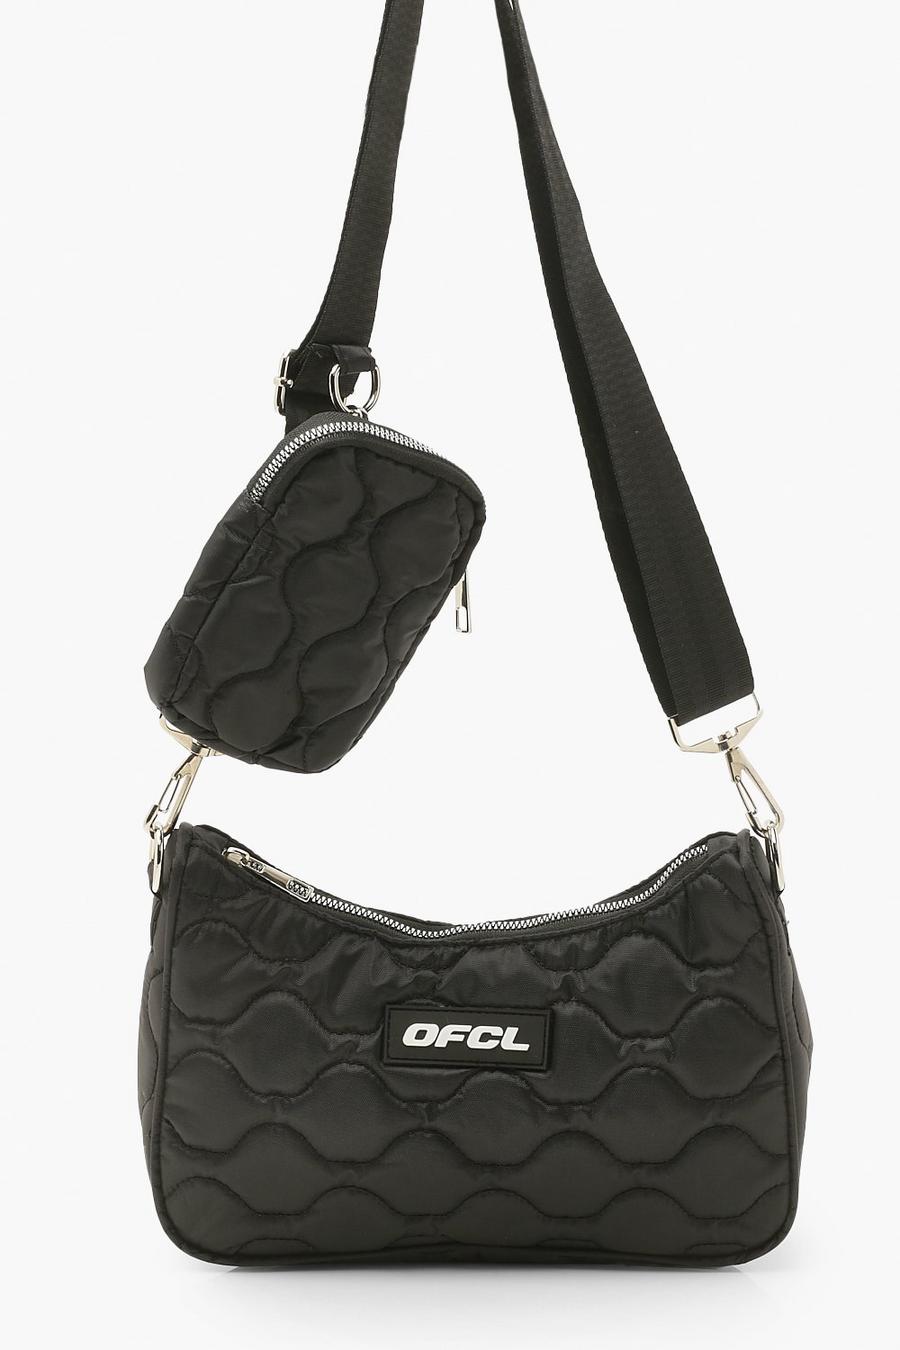 Black Ofcl Quilted Multi Pouch Cross Body Bag image number 1